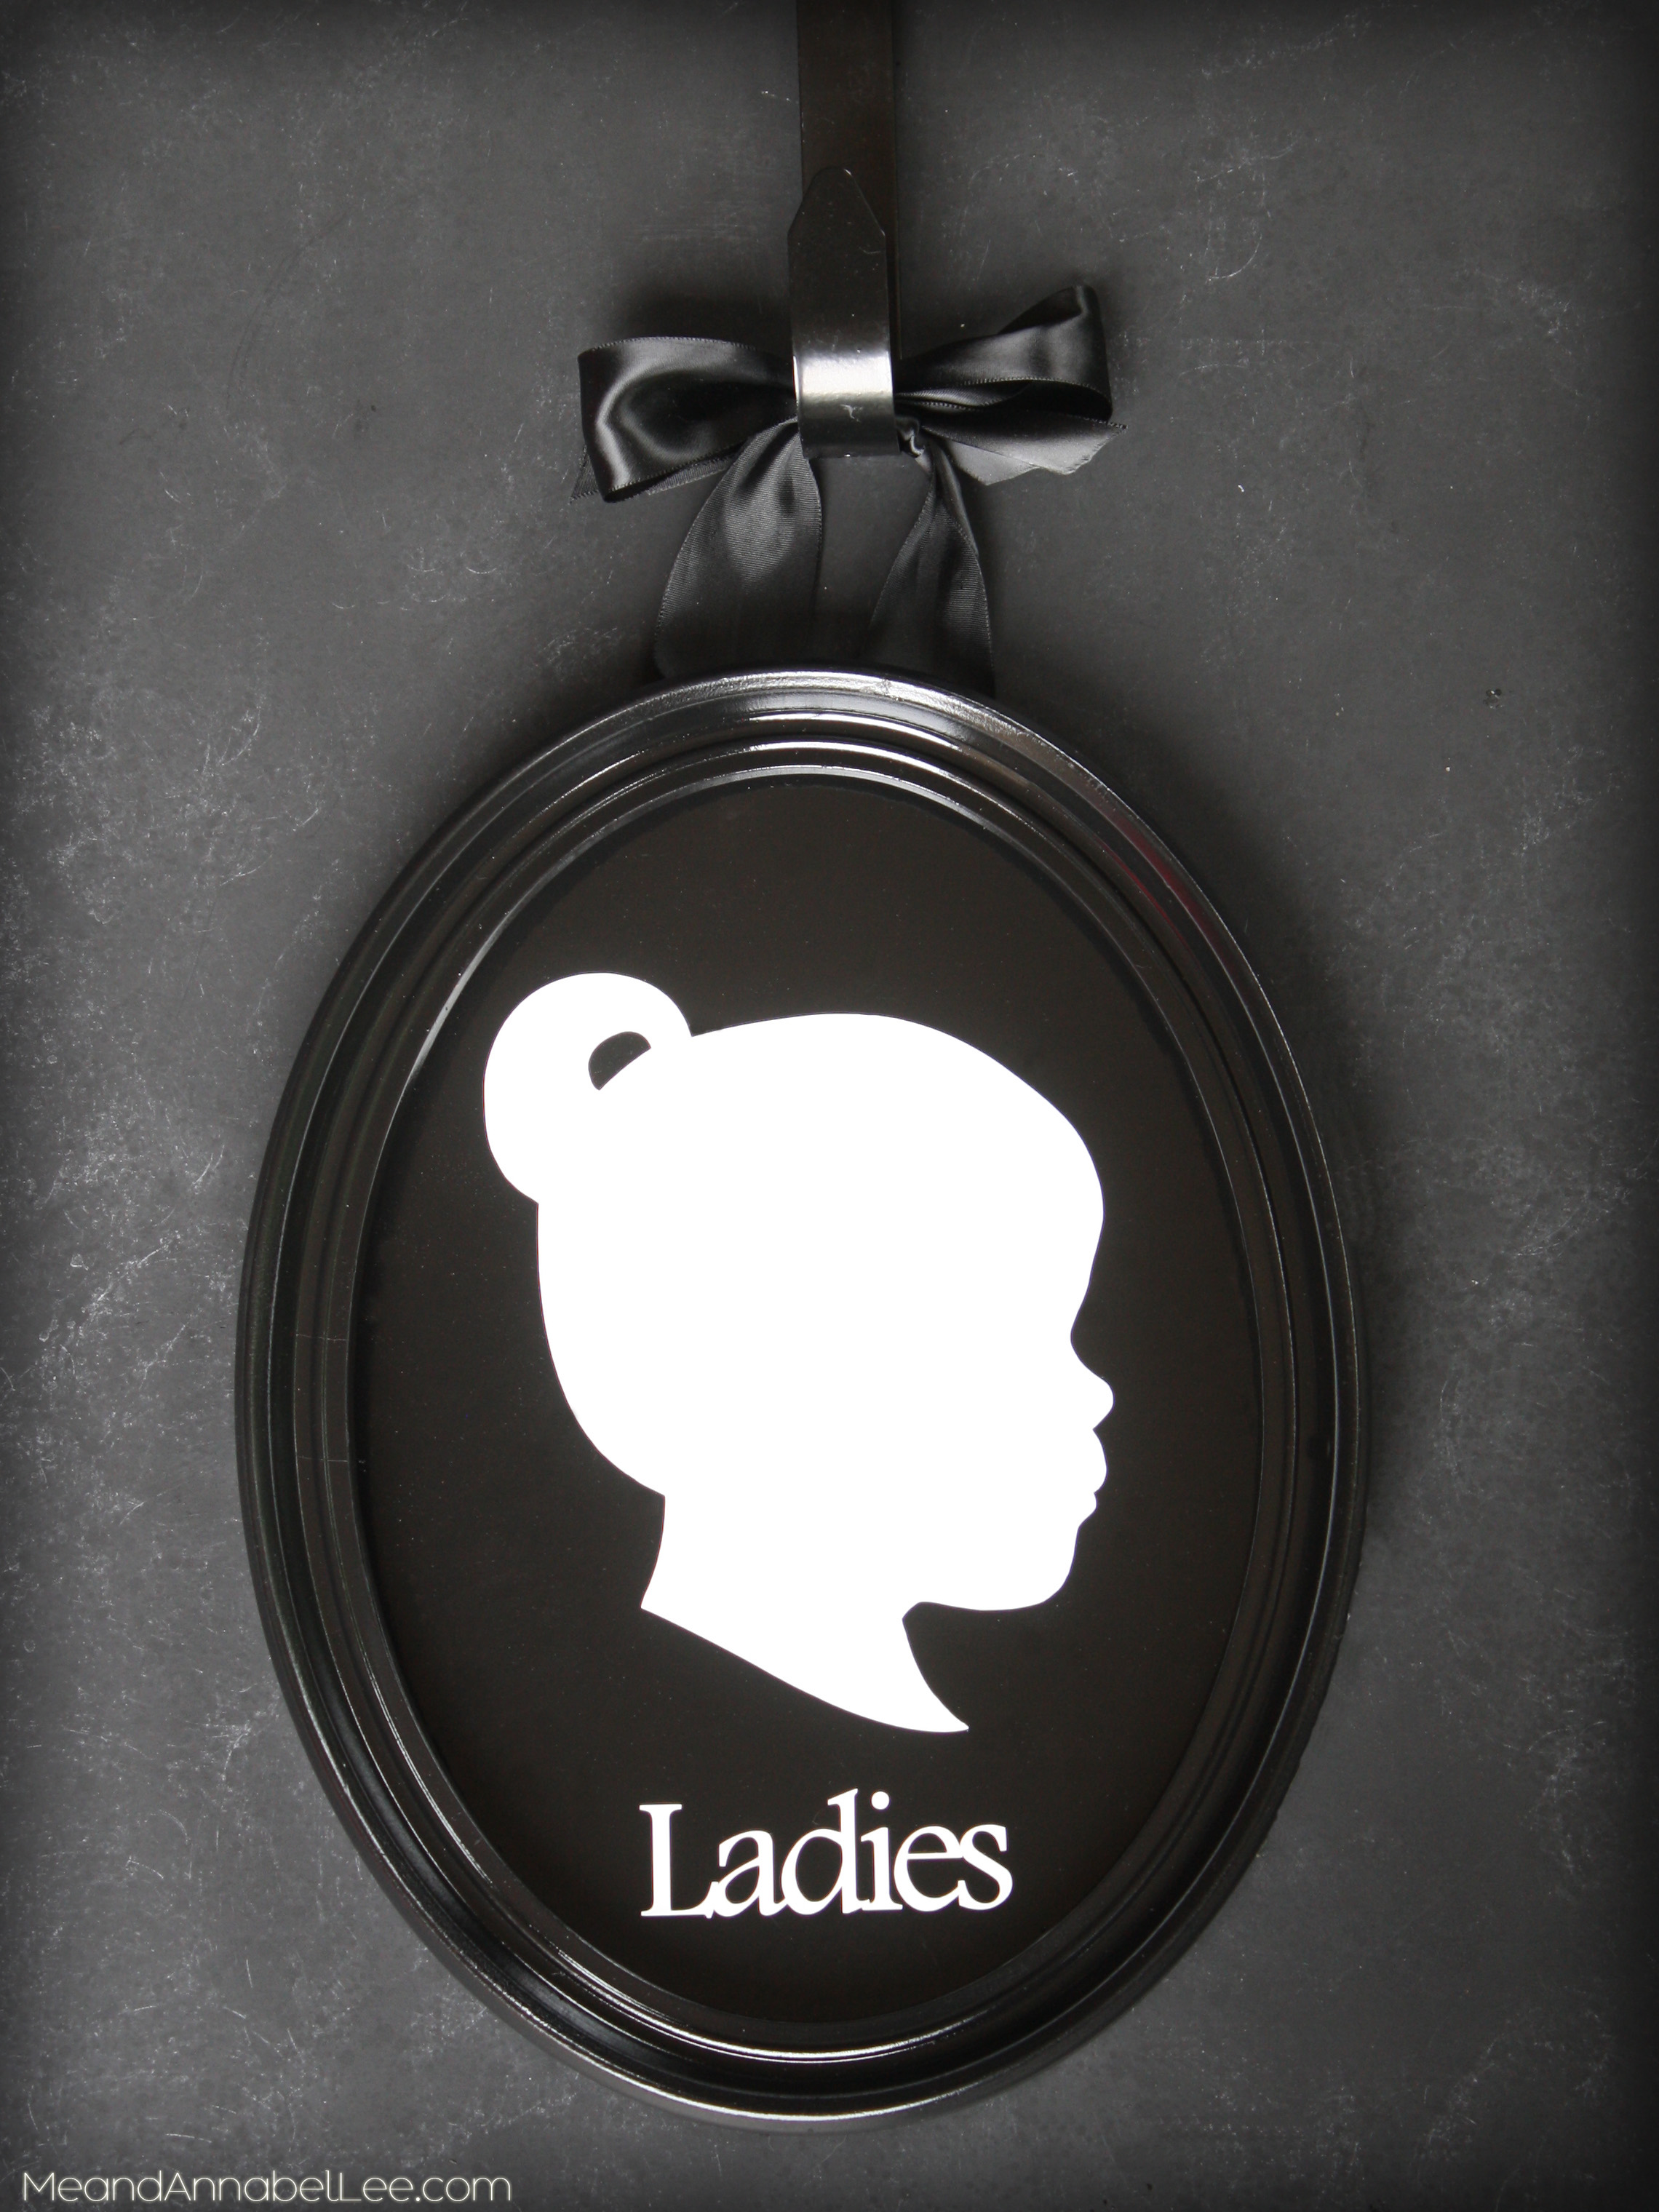 Victorian Wedding Details - Ladies & Gents Victorian Cameo Silhouette Bathroom Signs - Goth It Yourself - Vintage Gothic - Black & White & Gold Wedding Planning